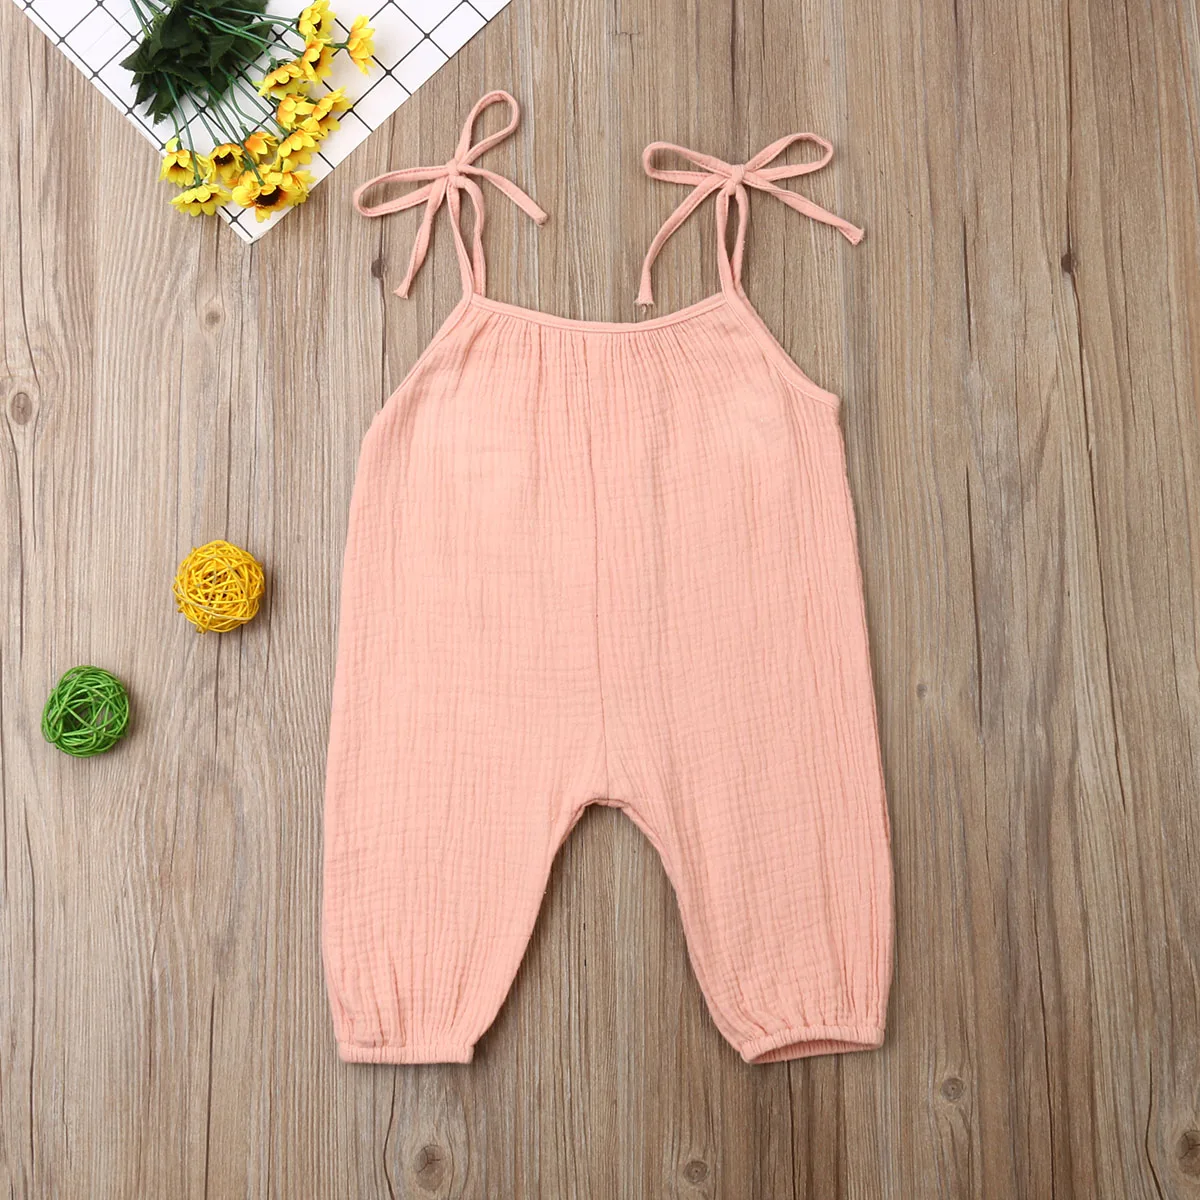 2019 Baby Summer Clothing Toddler Infant Baby Girl Wide Romper Jumpsuit Solid Outfit Sleeveless Sunsuit Cotton Spaghetti Clothes Warm Baby Bodysuits 